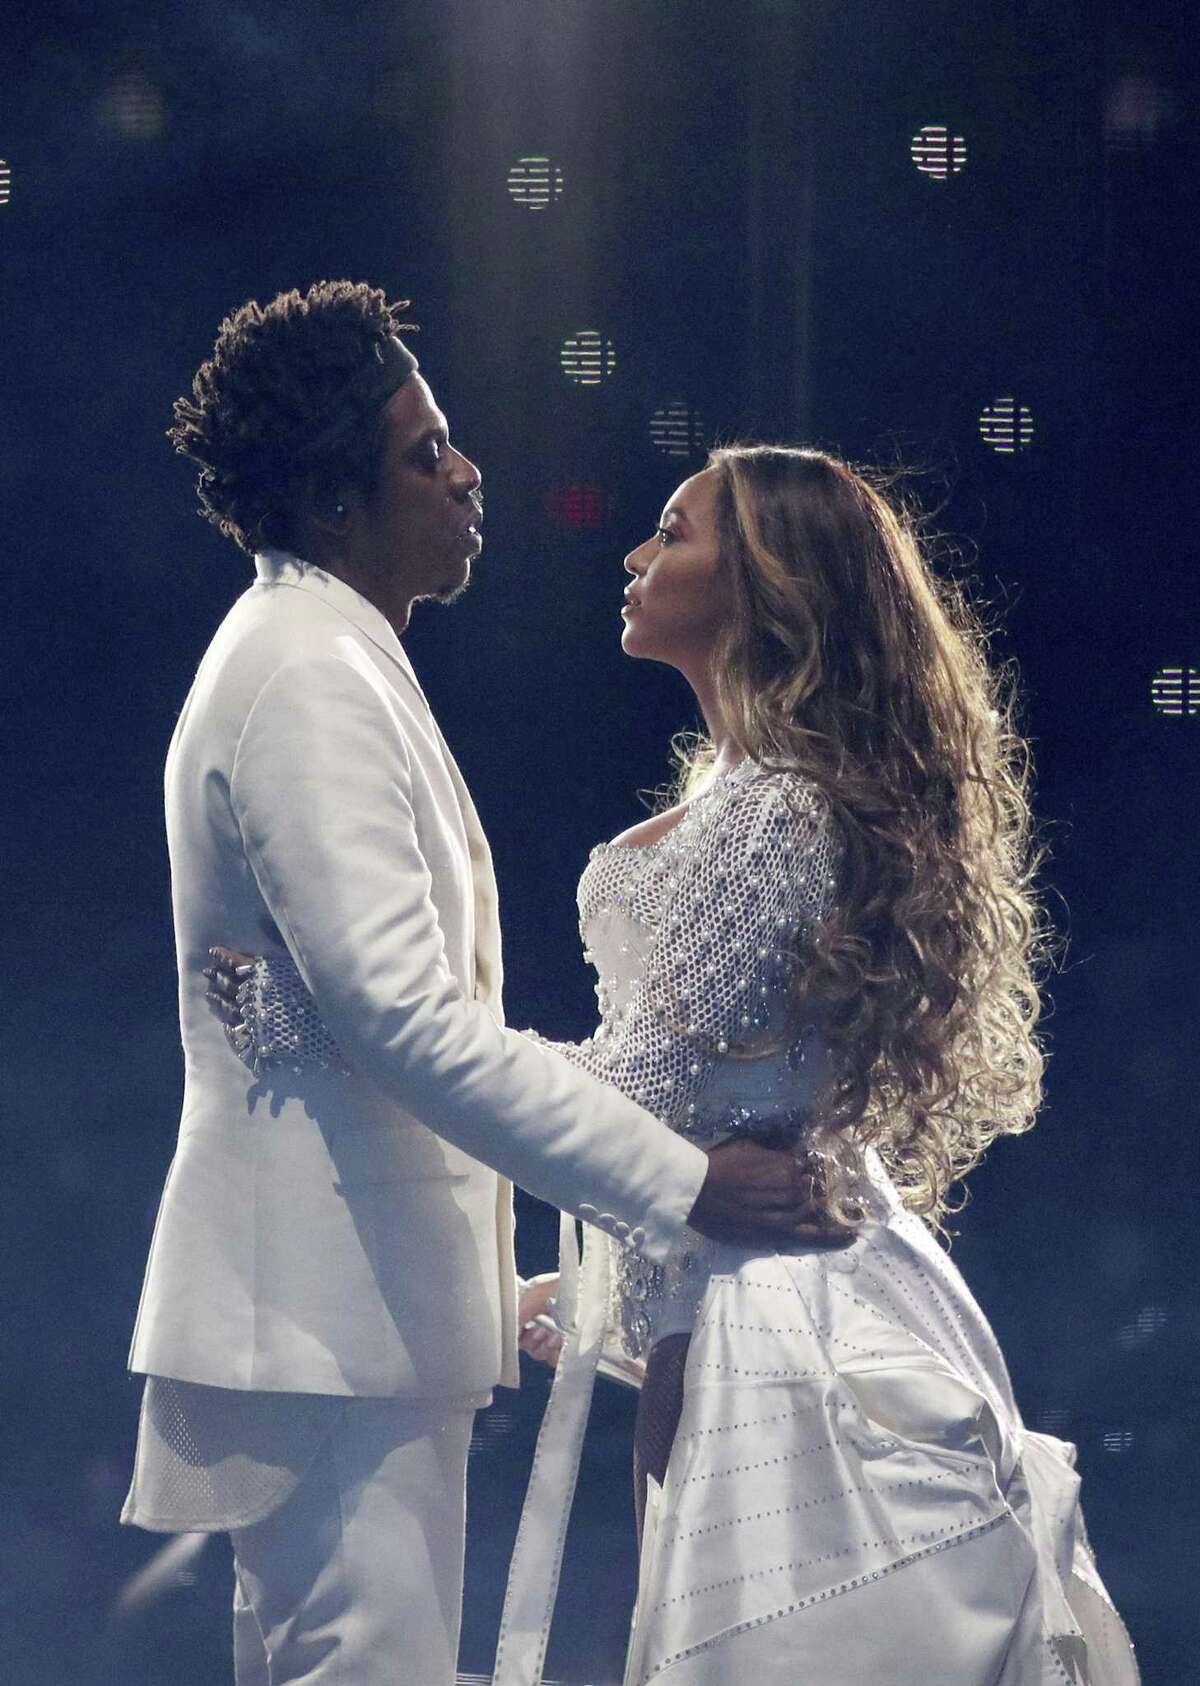 Beyoncé and Jay-Z eventually find love in their On The Run II tour, which came to Levi’s Stadium Saturday night, Sept. 29. A sold-out crowd was treated to an elaborate show full of a fresh bag of tricks and packed with the couple’s hit songs.